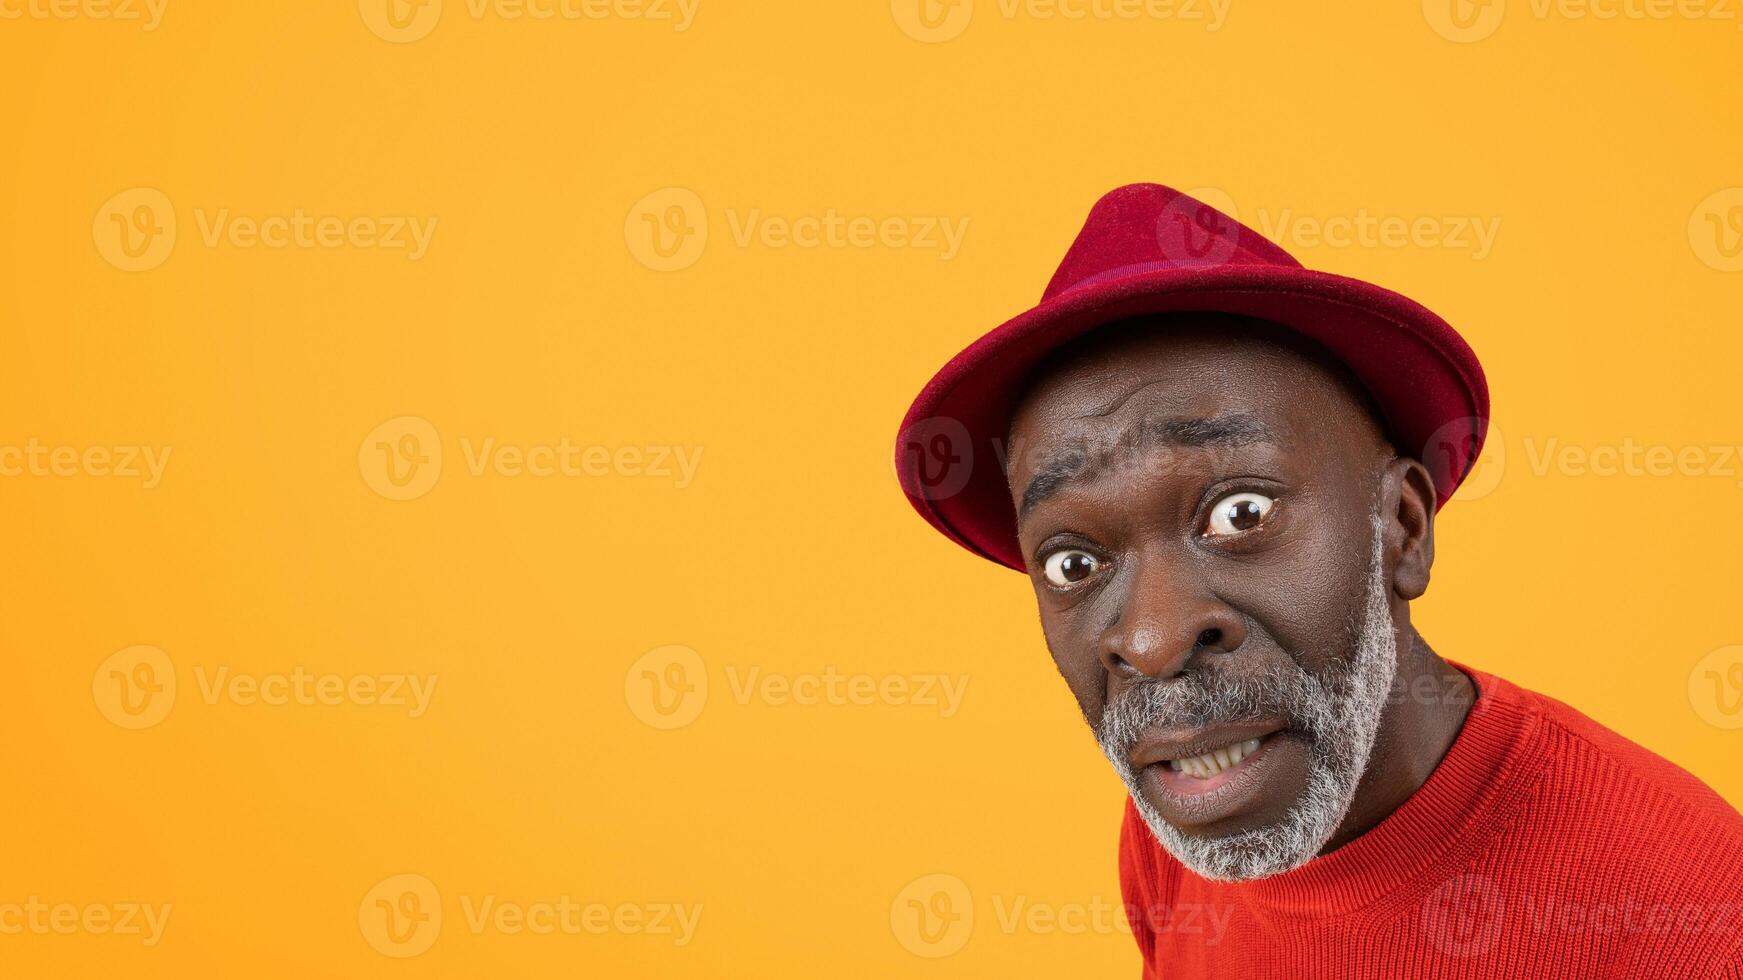 Surprised senior black man in red hat and sweater with a comically raised eyebrow photo